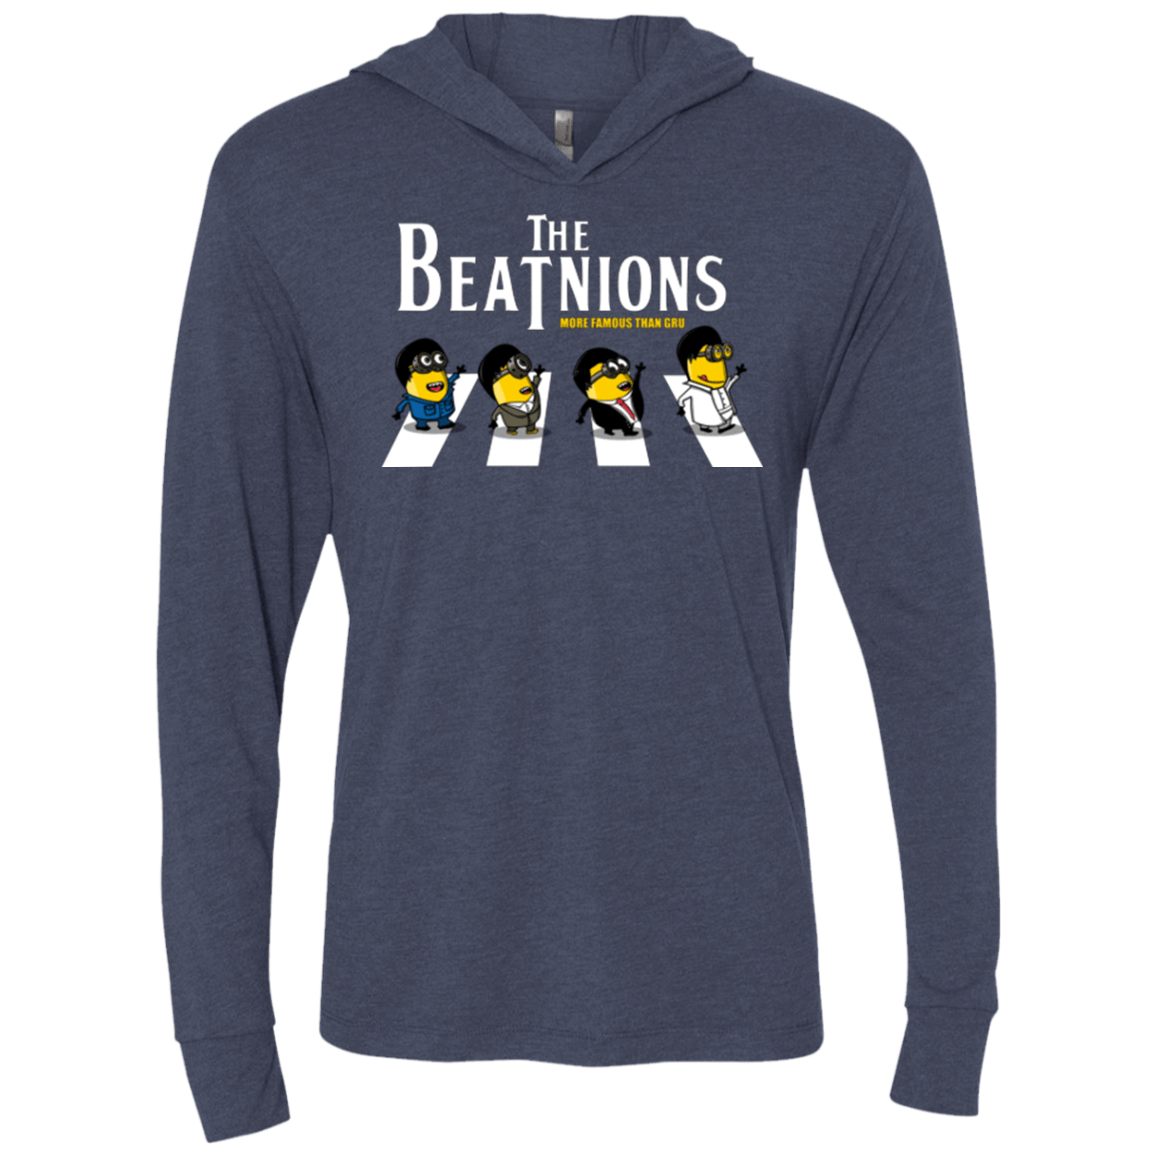 T-Shirts Vintage Navy / X-Small The Beatnions Triblend Long Sleeve Hoodie Tee